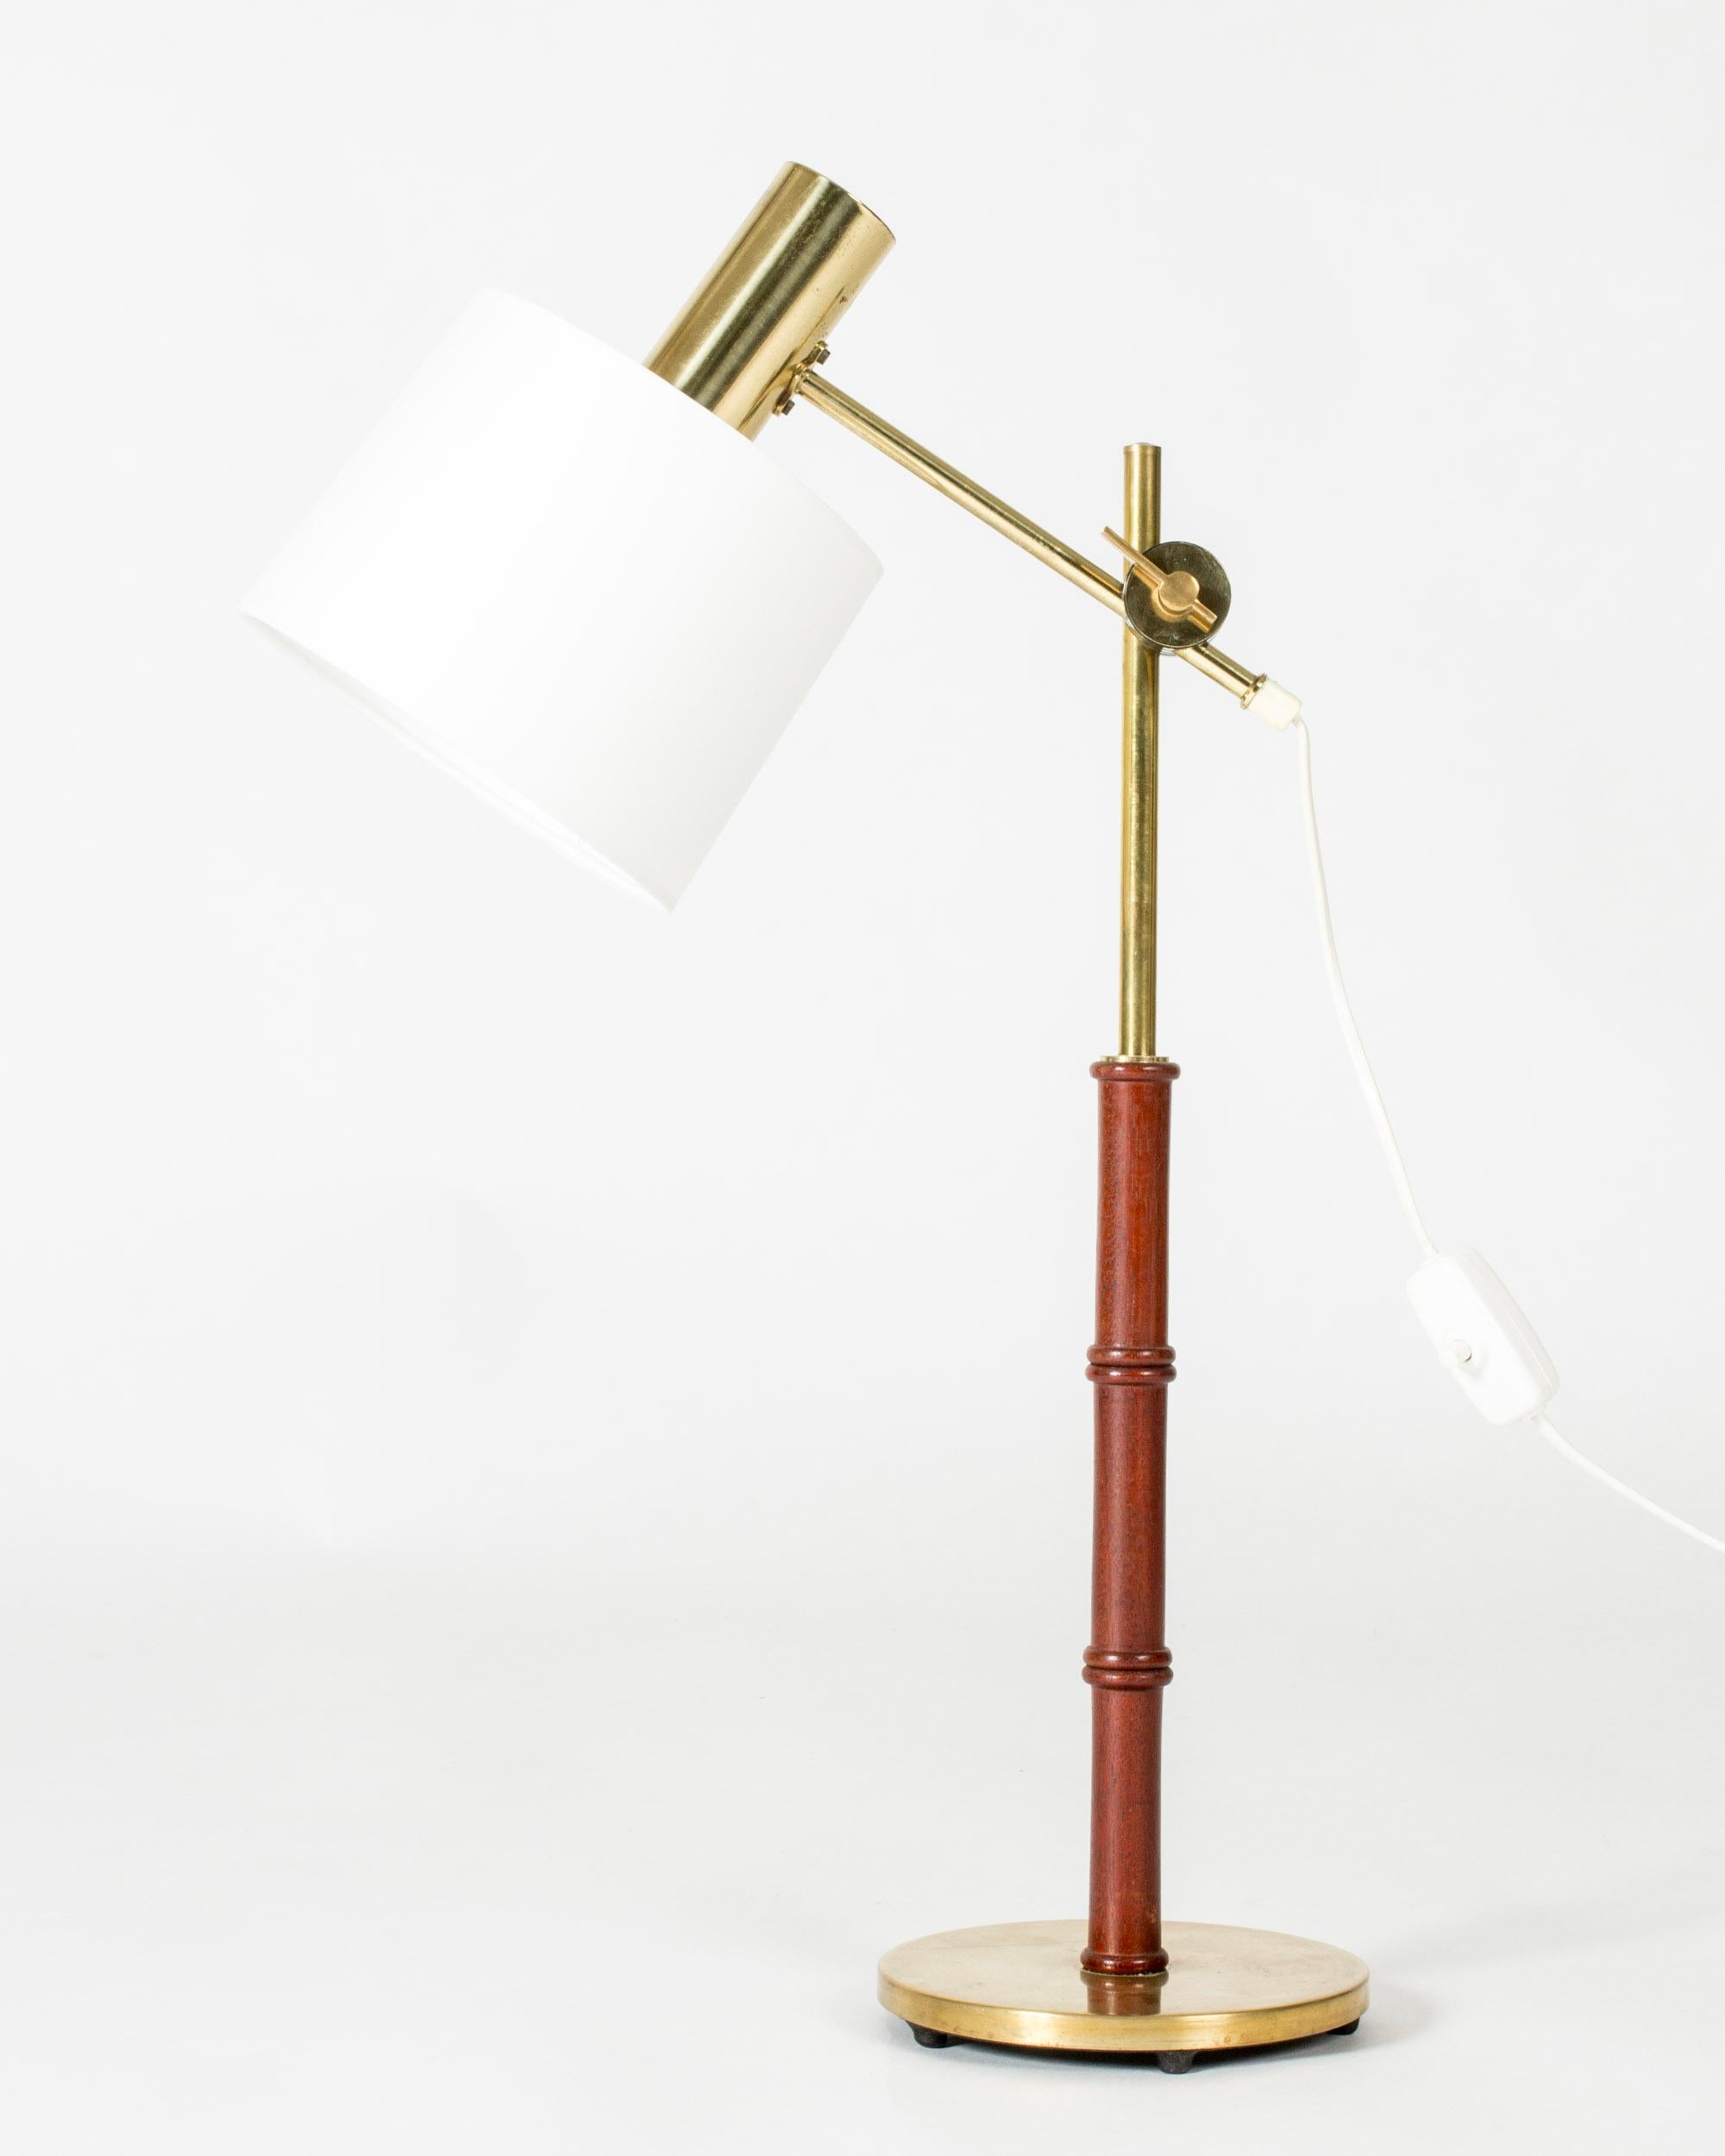 Cool table lamp from Falkenbergs Belysning, made from brass with a mahogany stem. Wood carved into a bamboo-stem form. Adjustable height and angle of the shade.